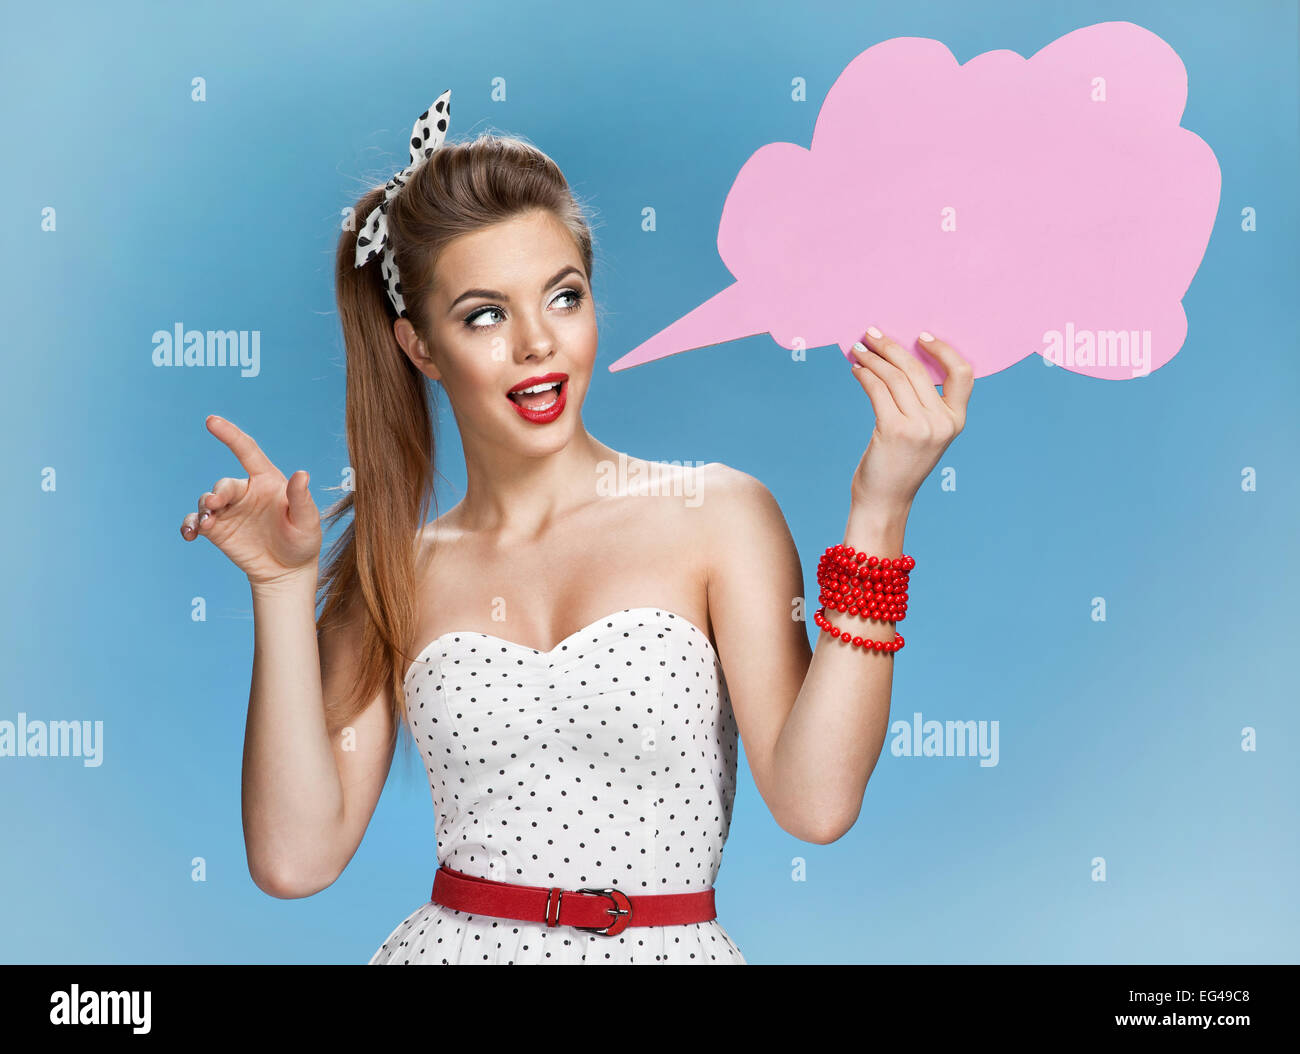 Gabby woman showing sign speech bubble banner looking happy excited Stock Photo